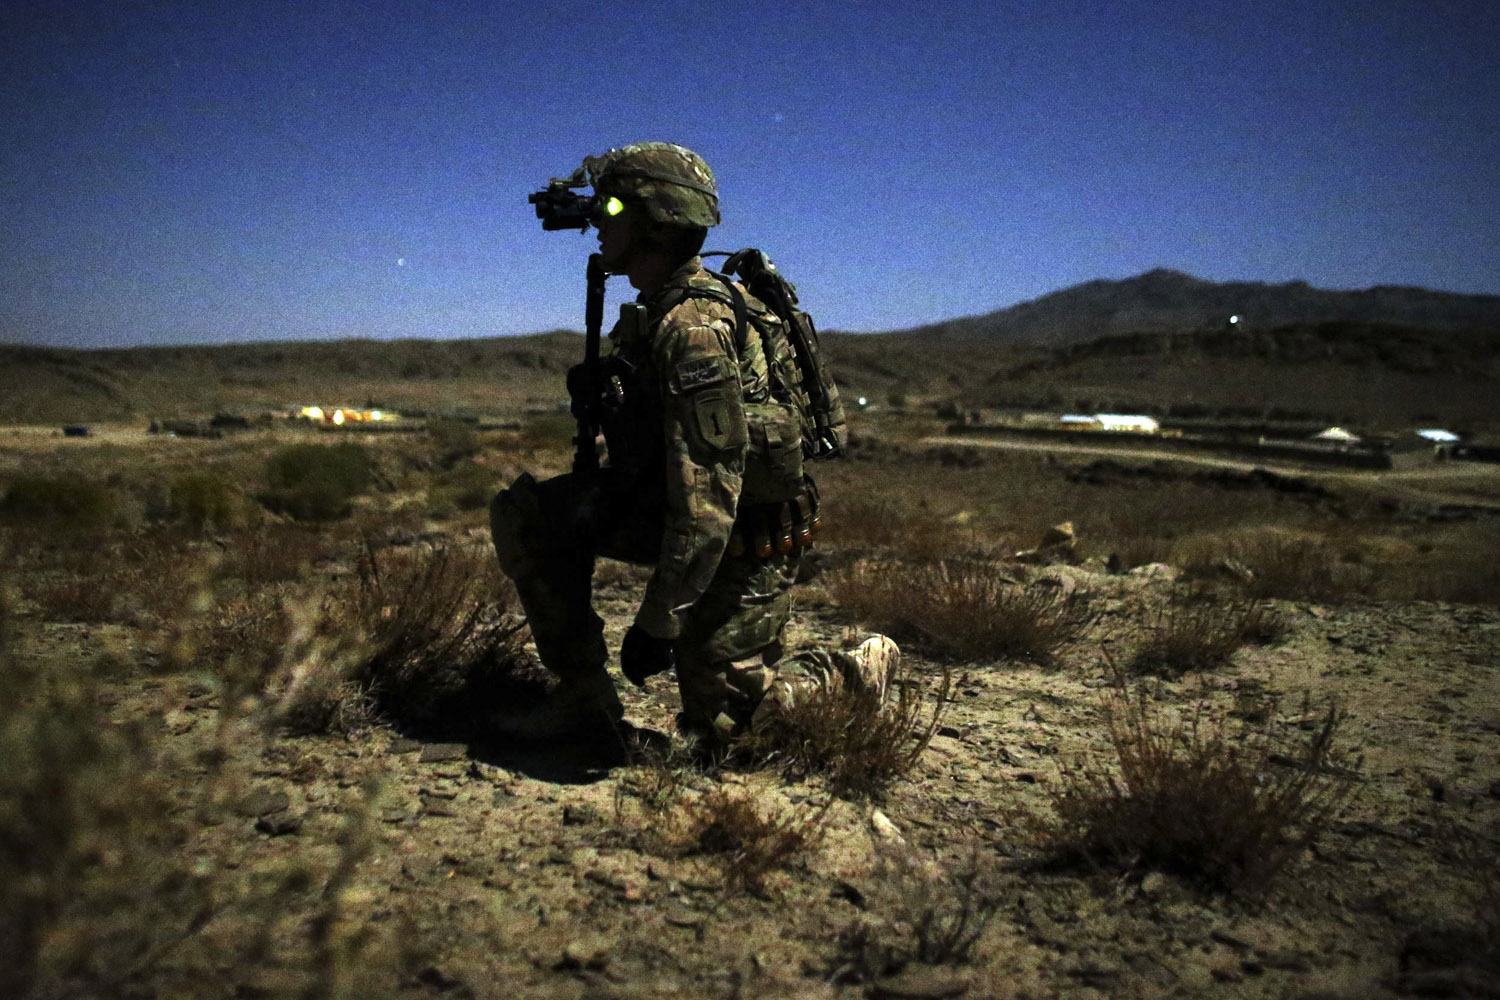 Image: Oct. 28, 2012. A U.S. soldier kneels during a night foot patrol near COP (Combat outpost) Sar Howza in Paktika province, Afghanistan.